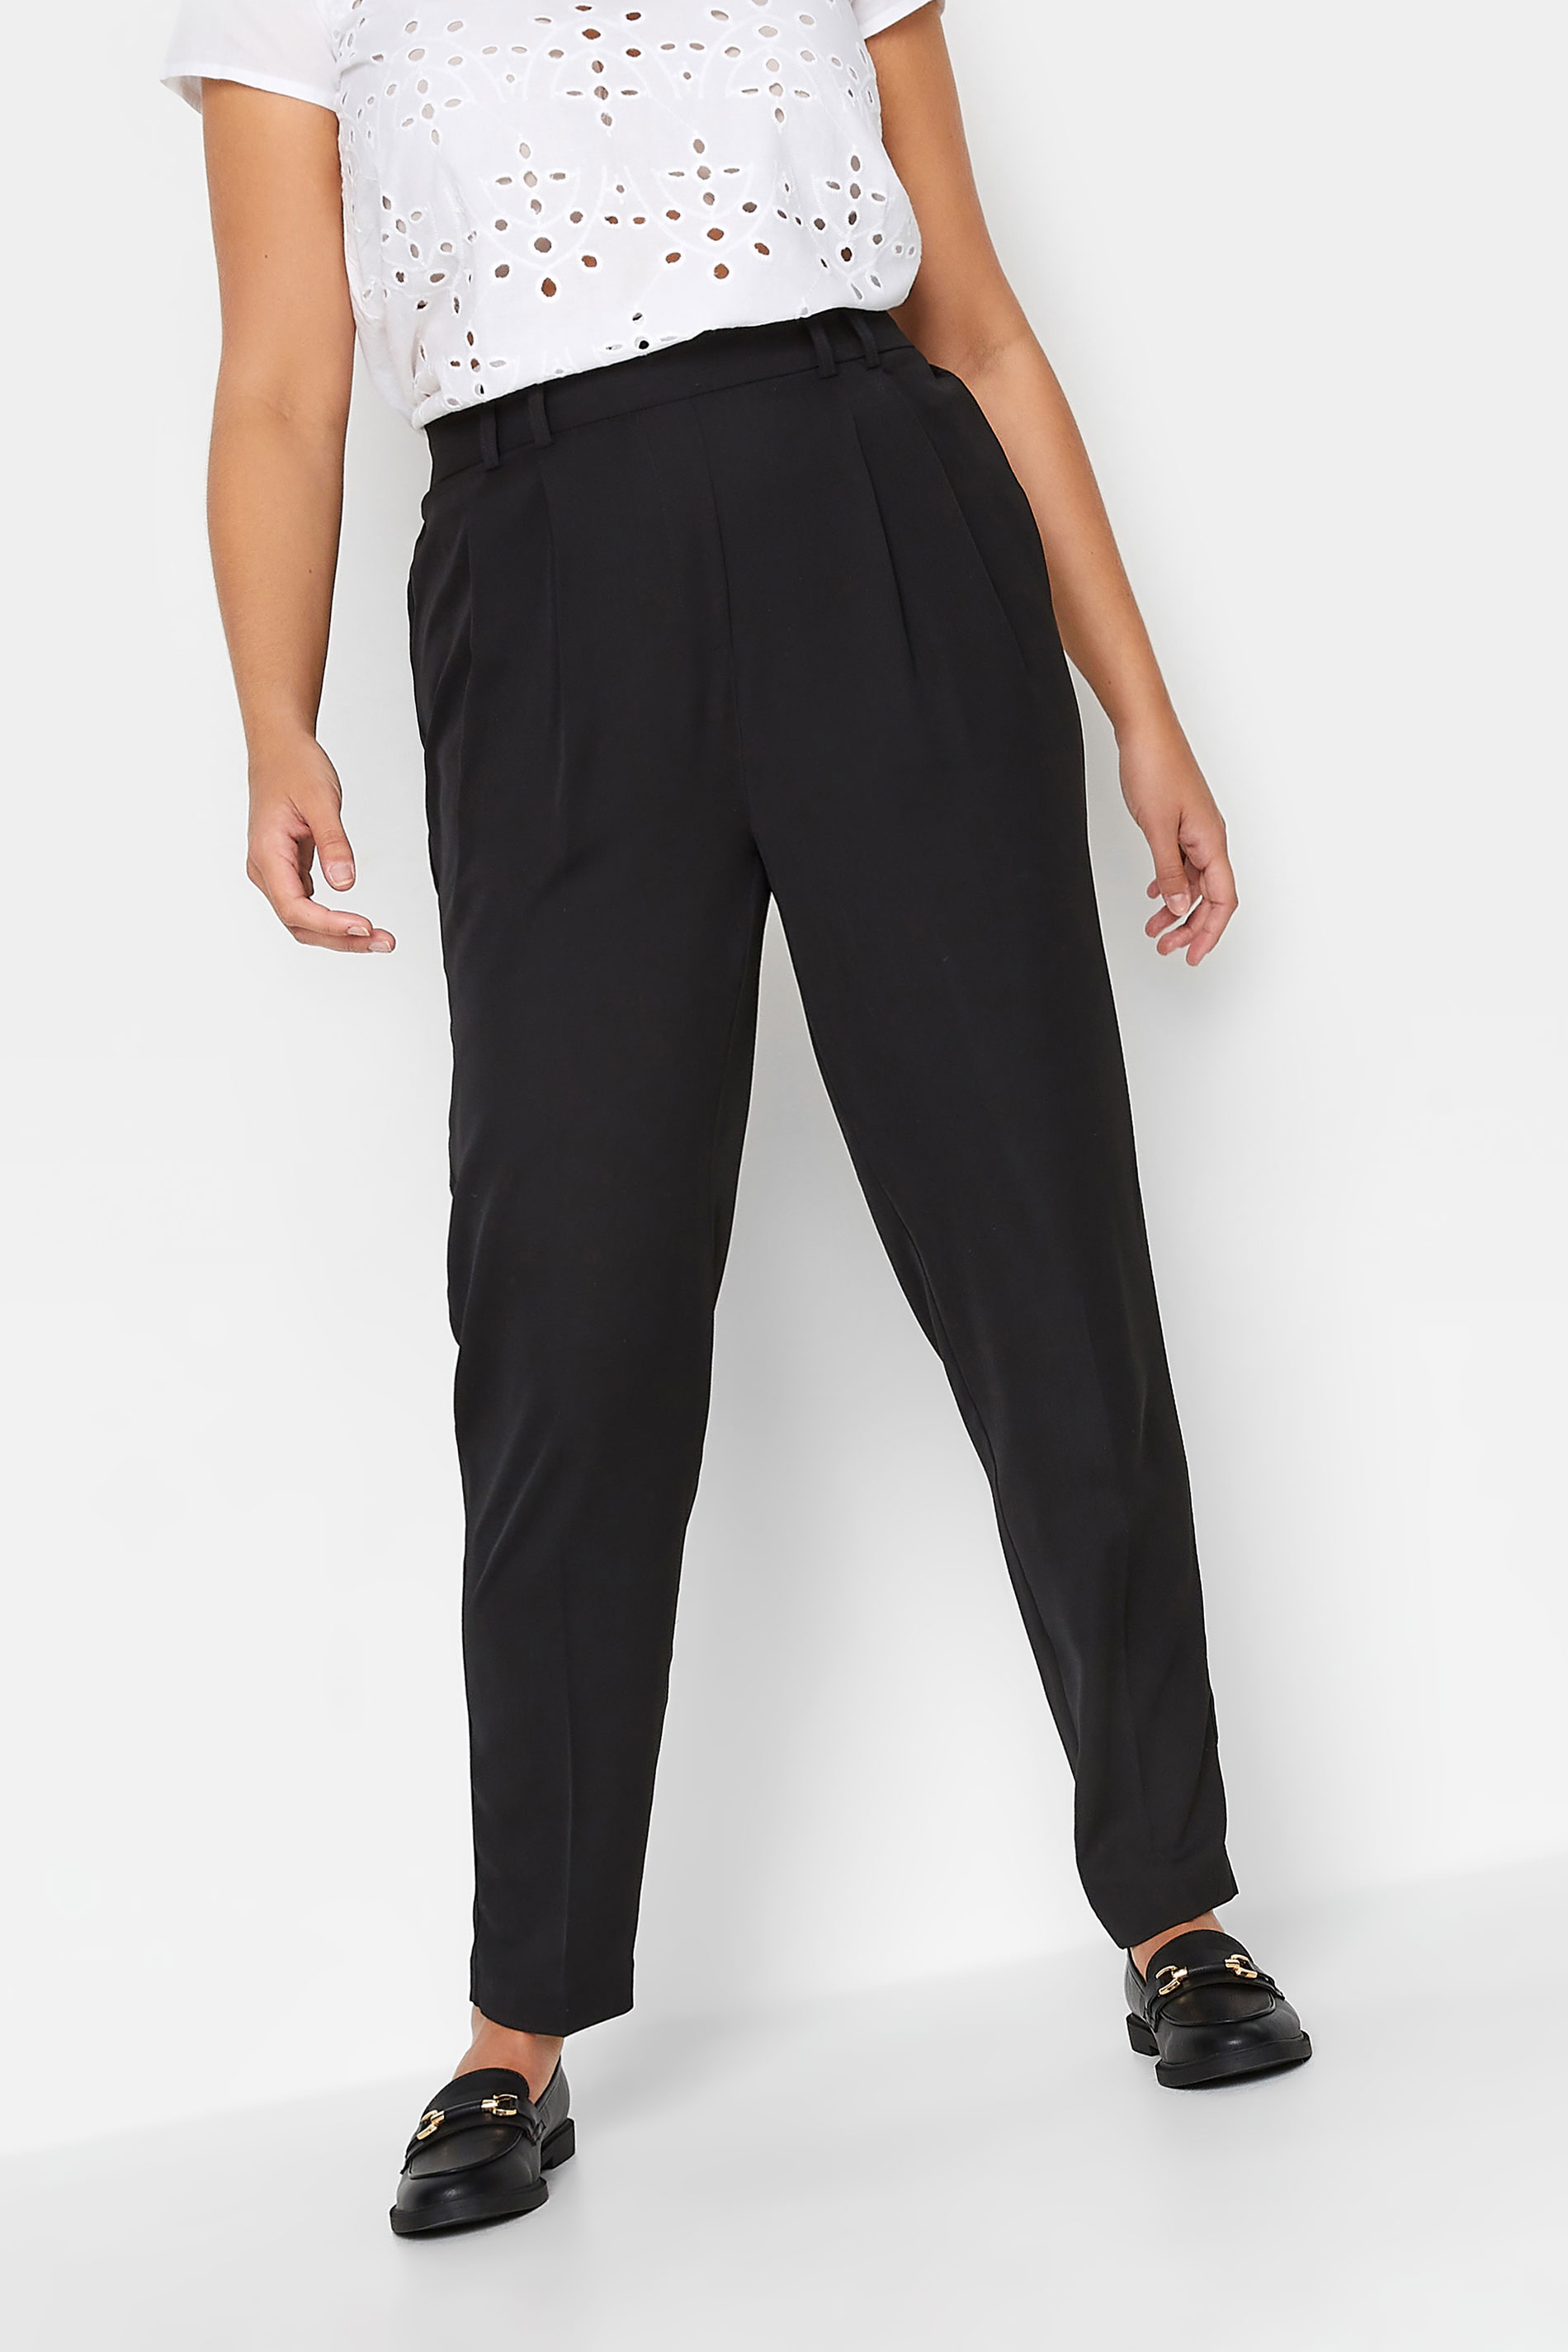 Buy Black tapered trousers made of suiting fabric plus size trousers black  color suiting fabric casual style buy in VOVK online store for 790 UAH